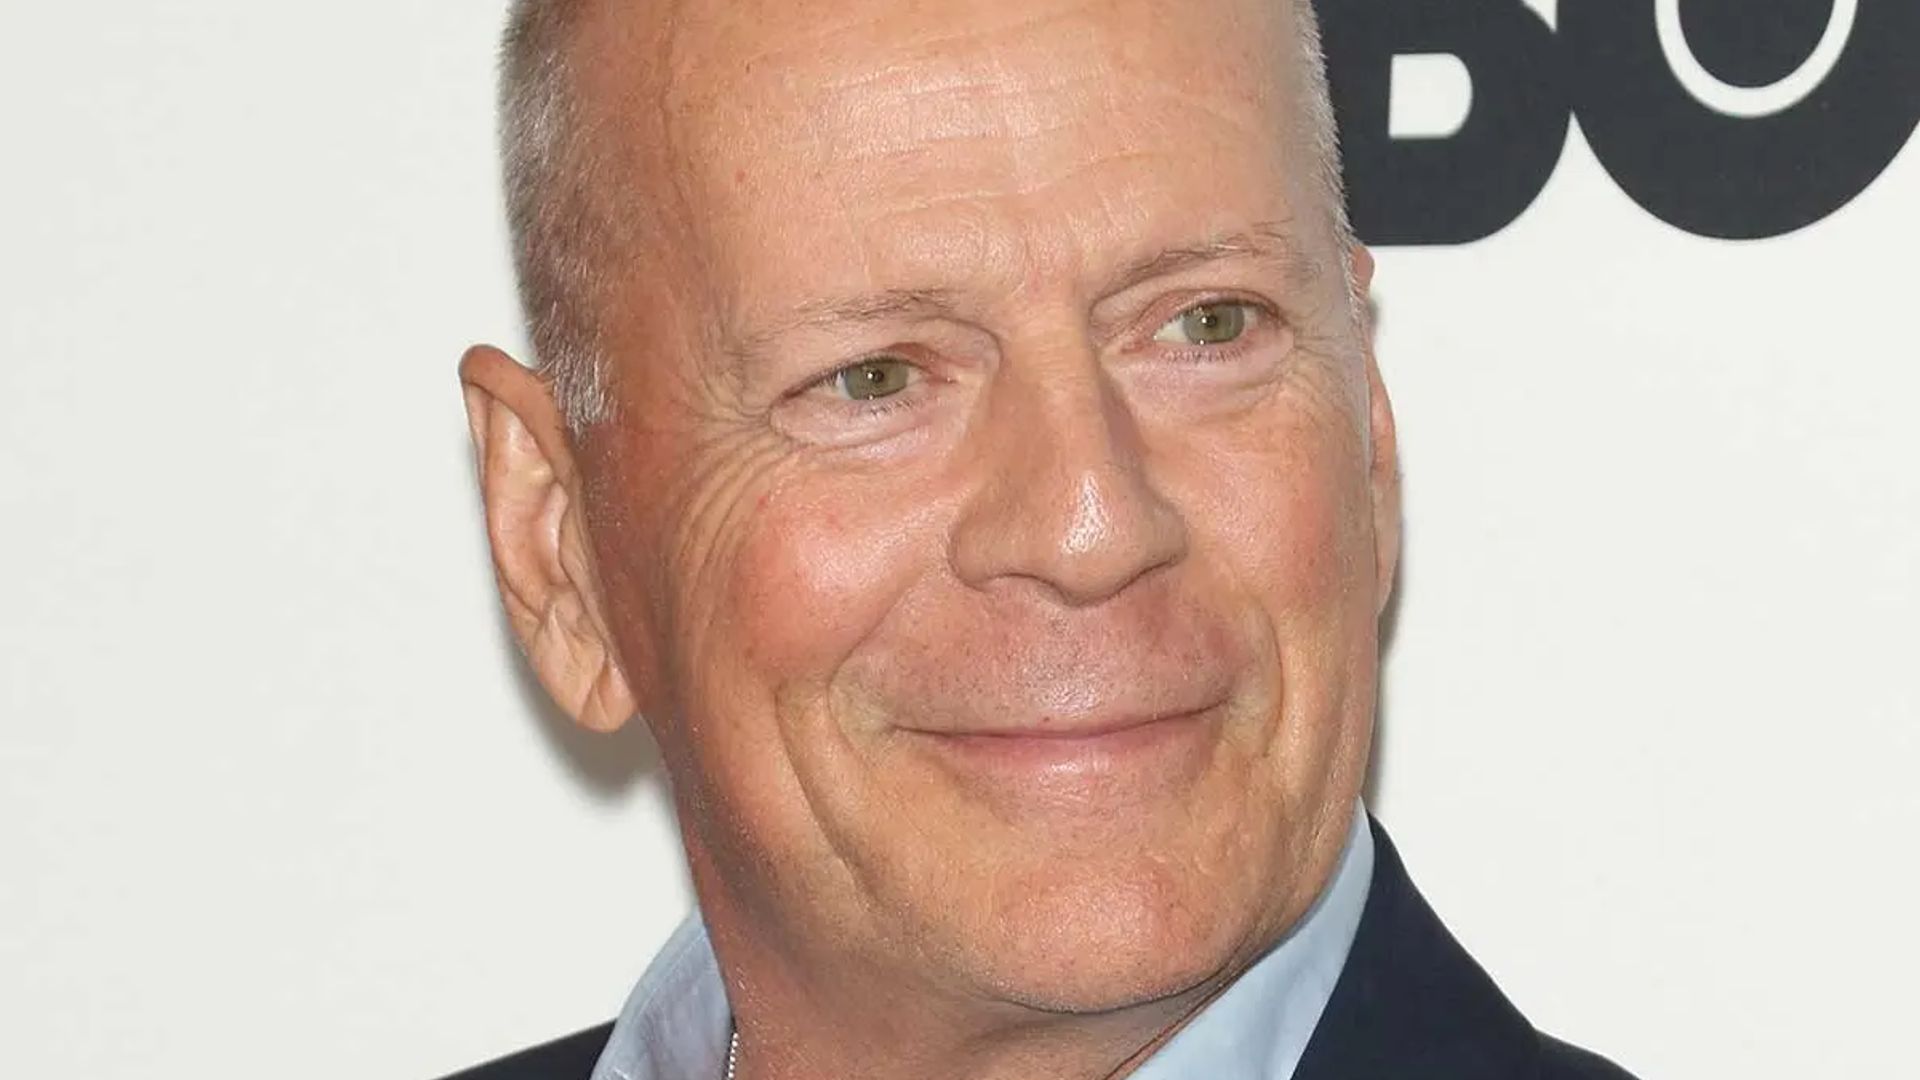 Bruce Willis' young children make rare appearance alongside actor following dementia diagnosis – watch